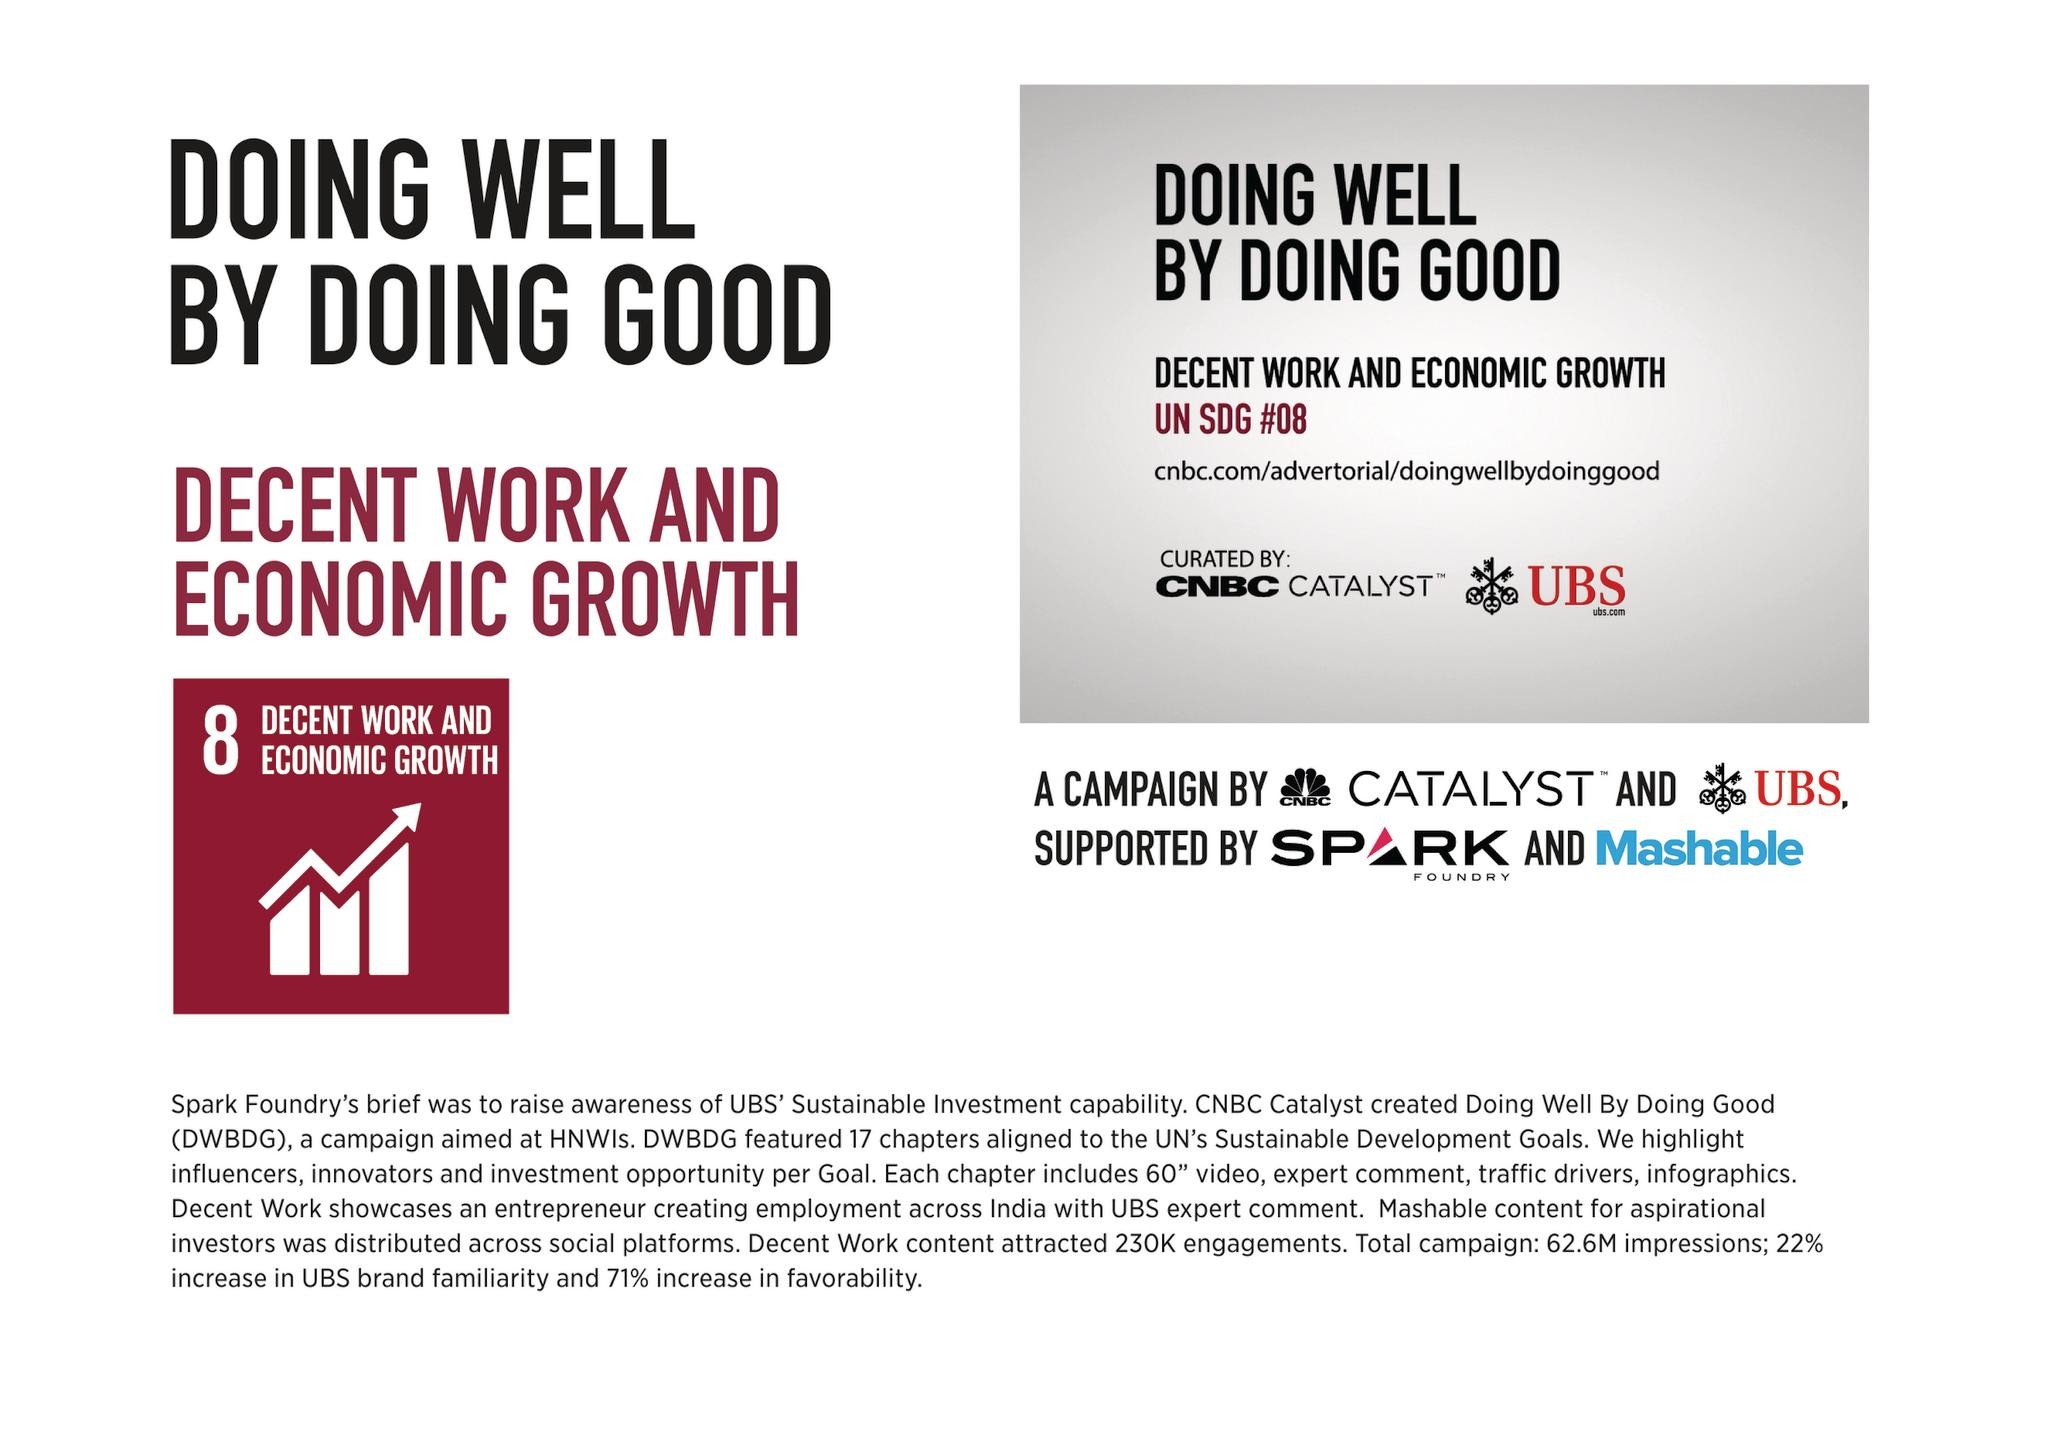 Doing Well by Doing Good - Decent Work and Economic Growth